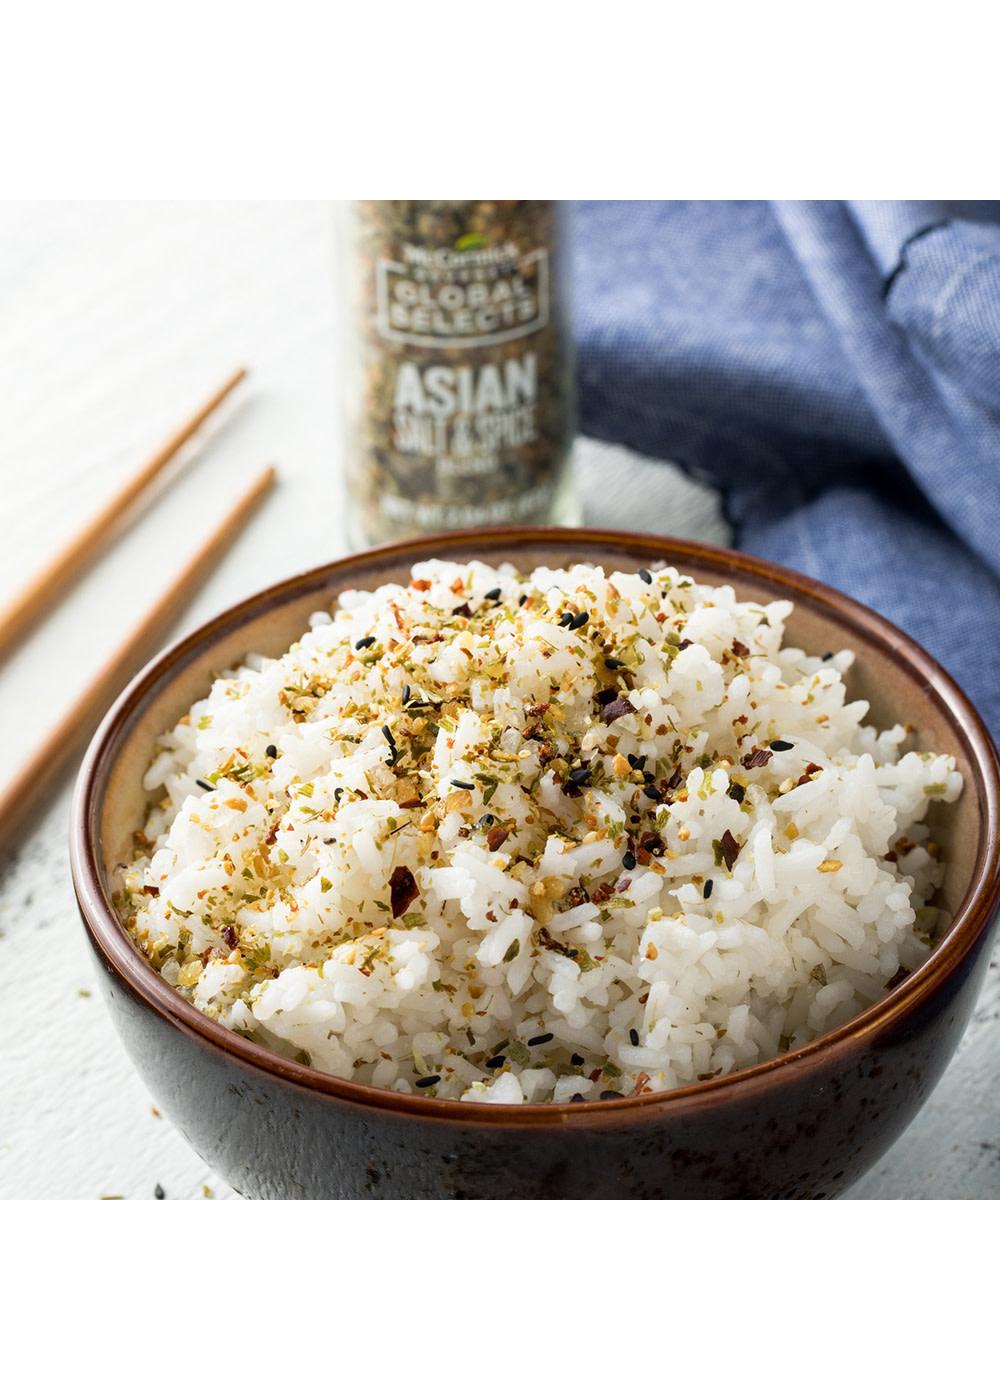 McCormick Gourmet Global Selects Asian Salt & Spice Blend; image 2 of 9